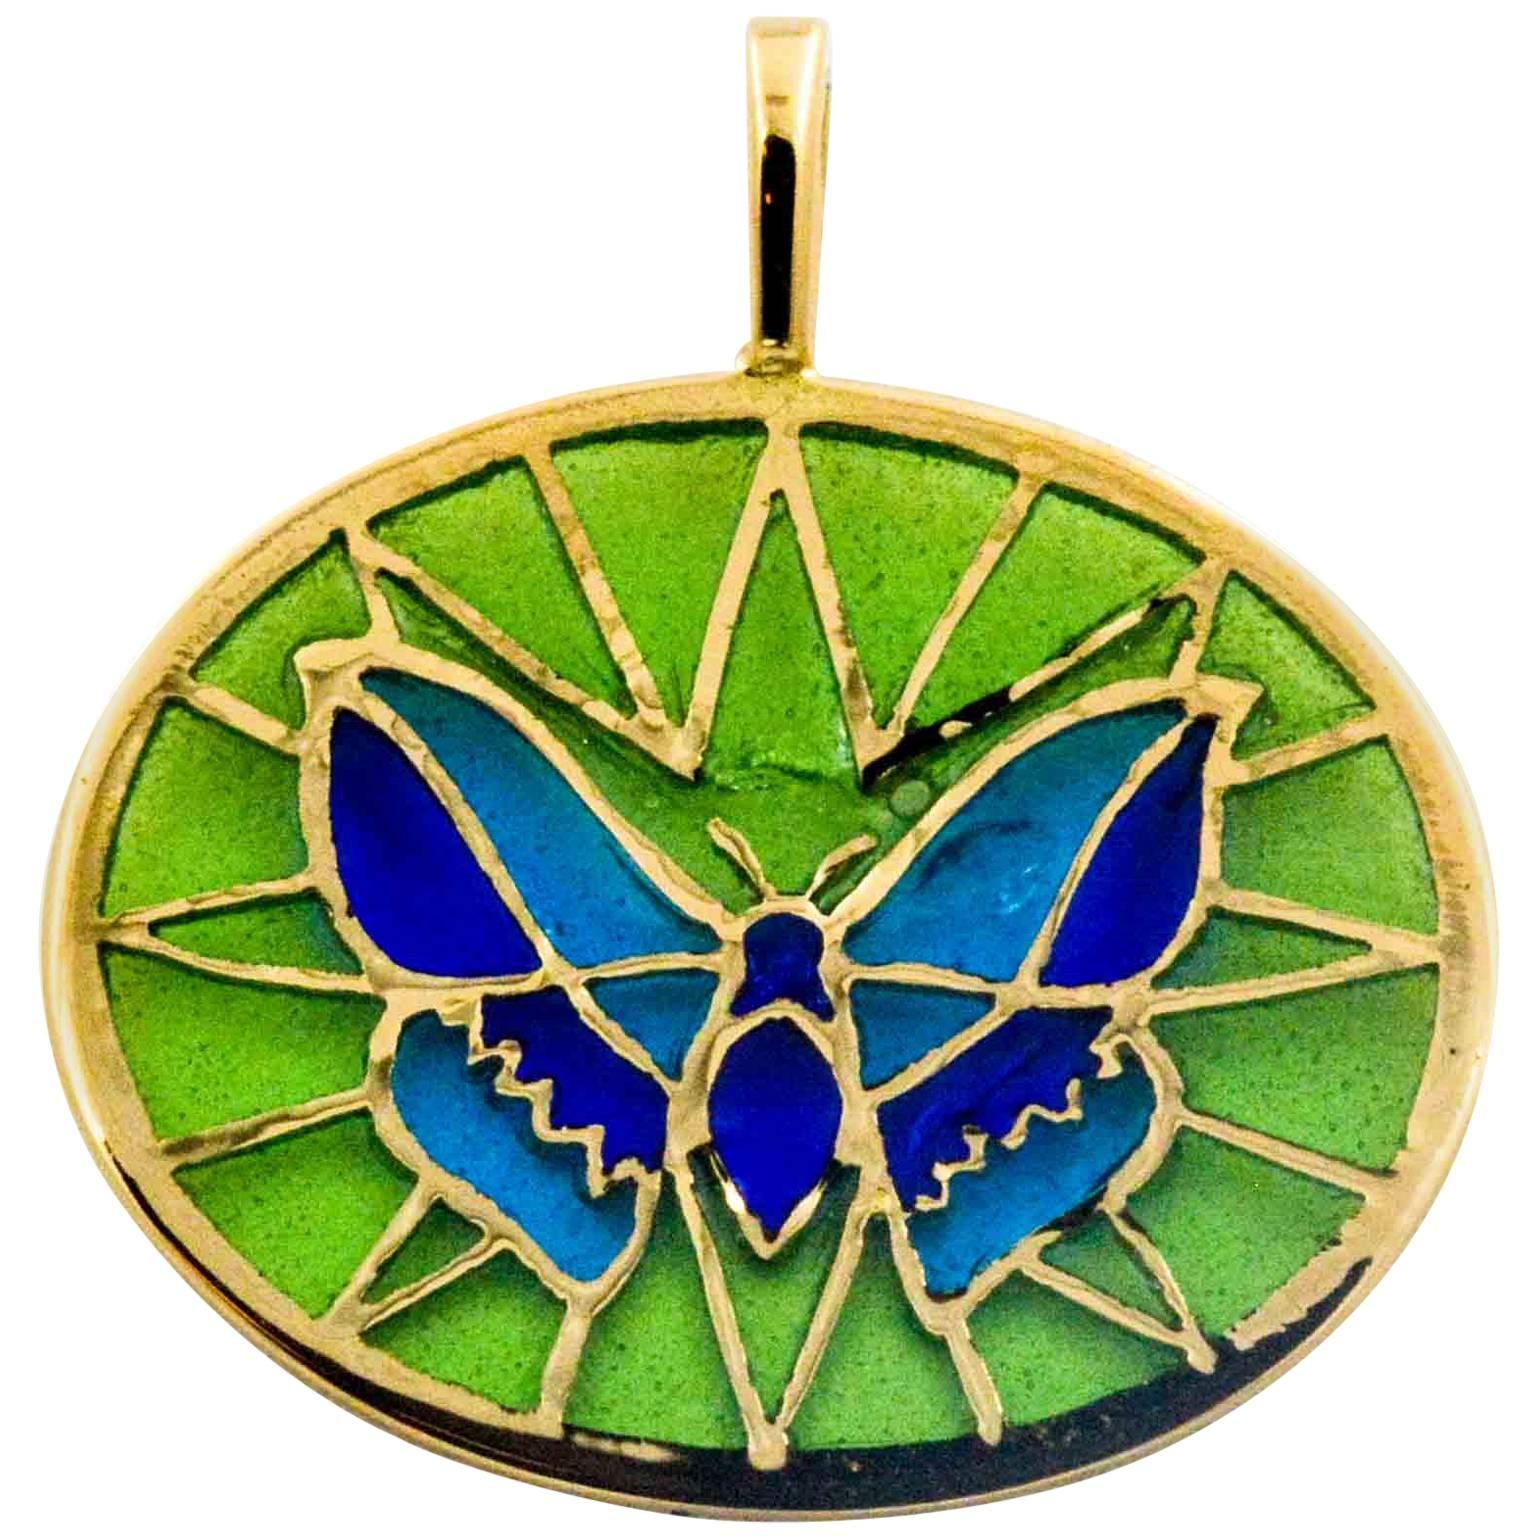 On a pale green background, a two color dark and light blue butterfly is crafted in the art of Plique A Jour glass enameling. A master craftsman created this delicate little butterfly with hand enameling blues and greens with 18 karat yellow gold as